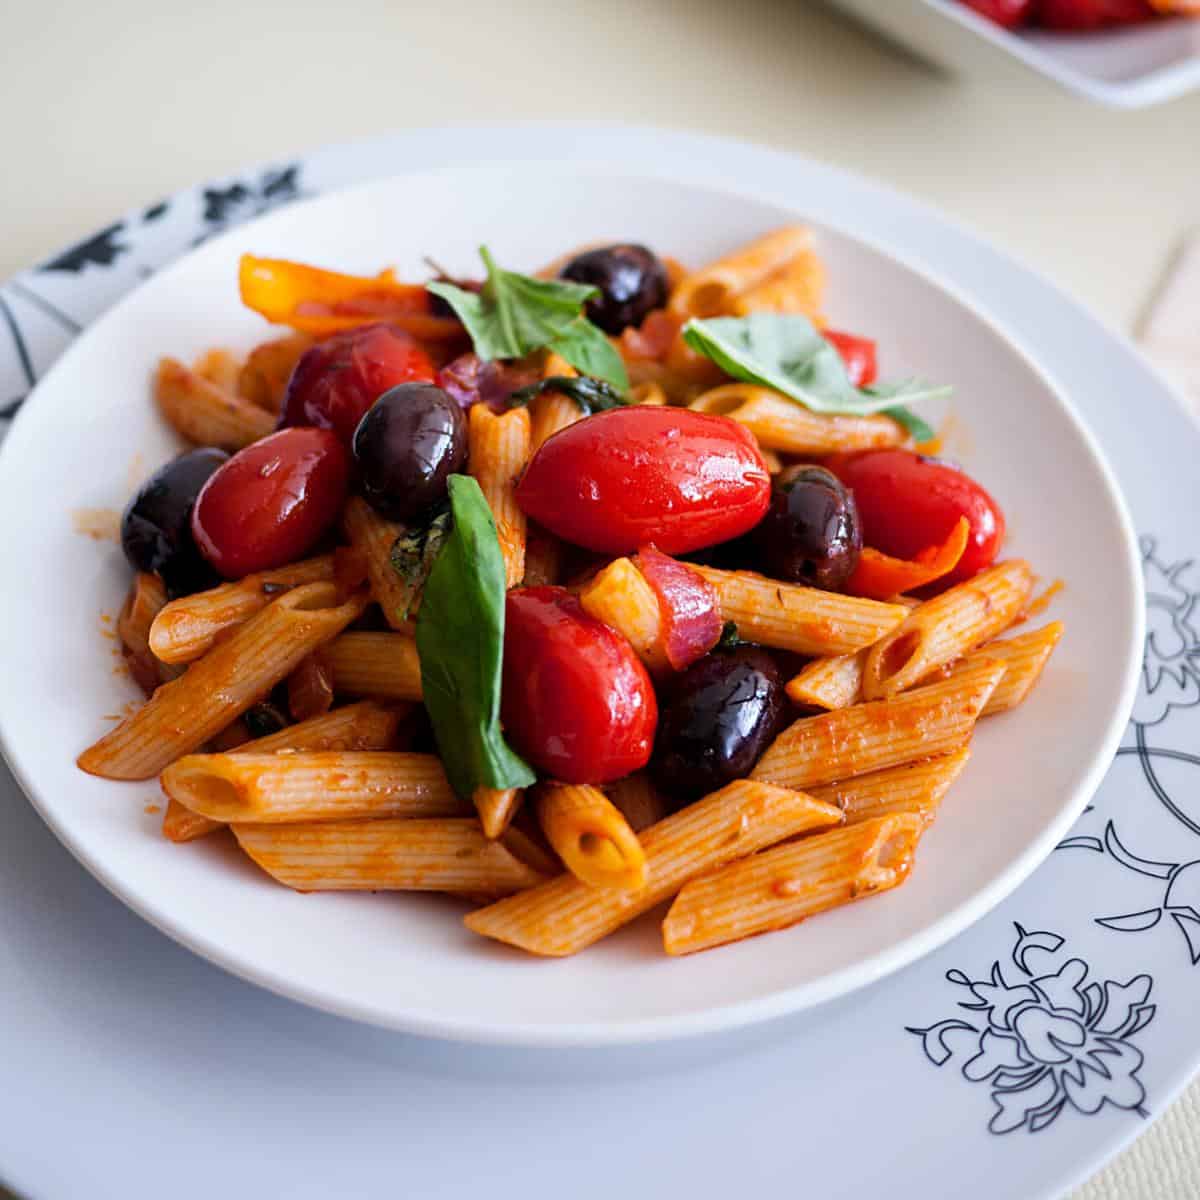 A plate with pasta and cherry tomatoes.